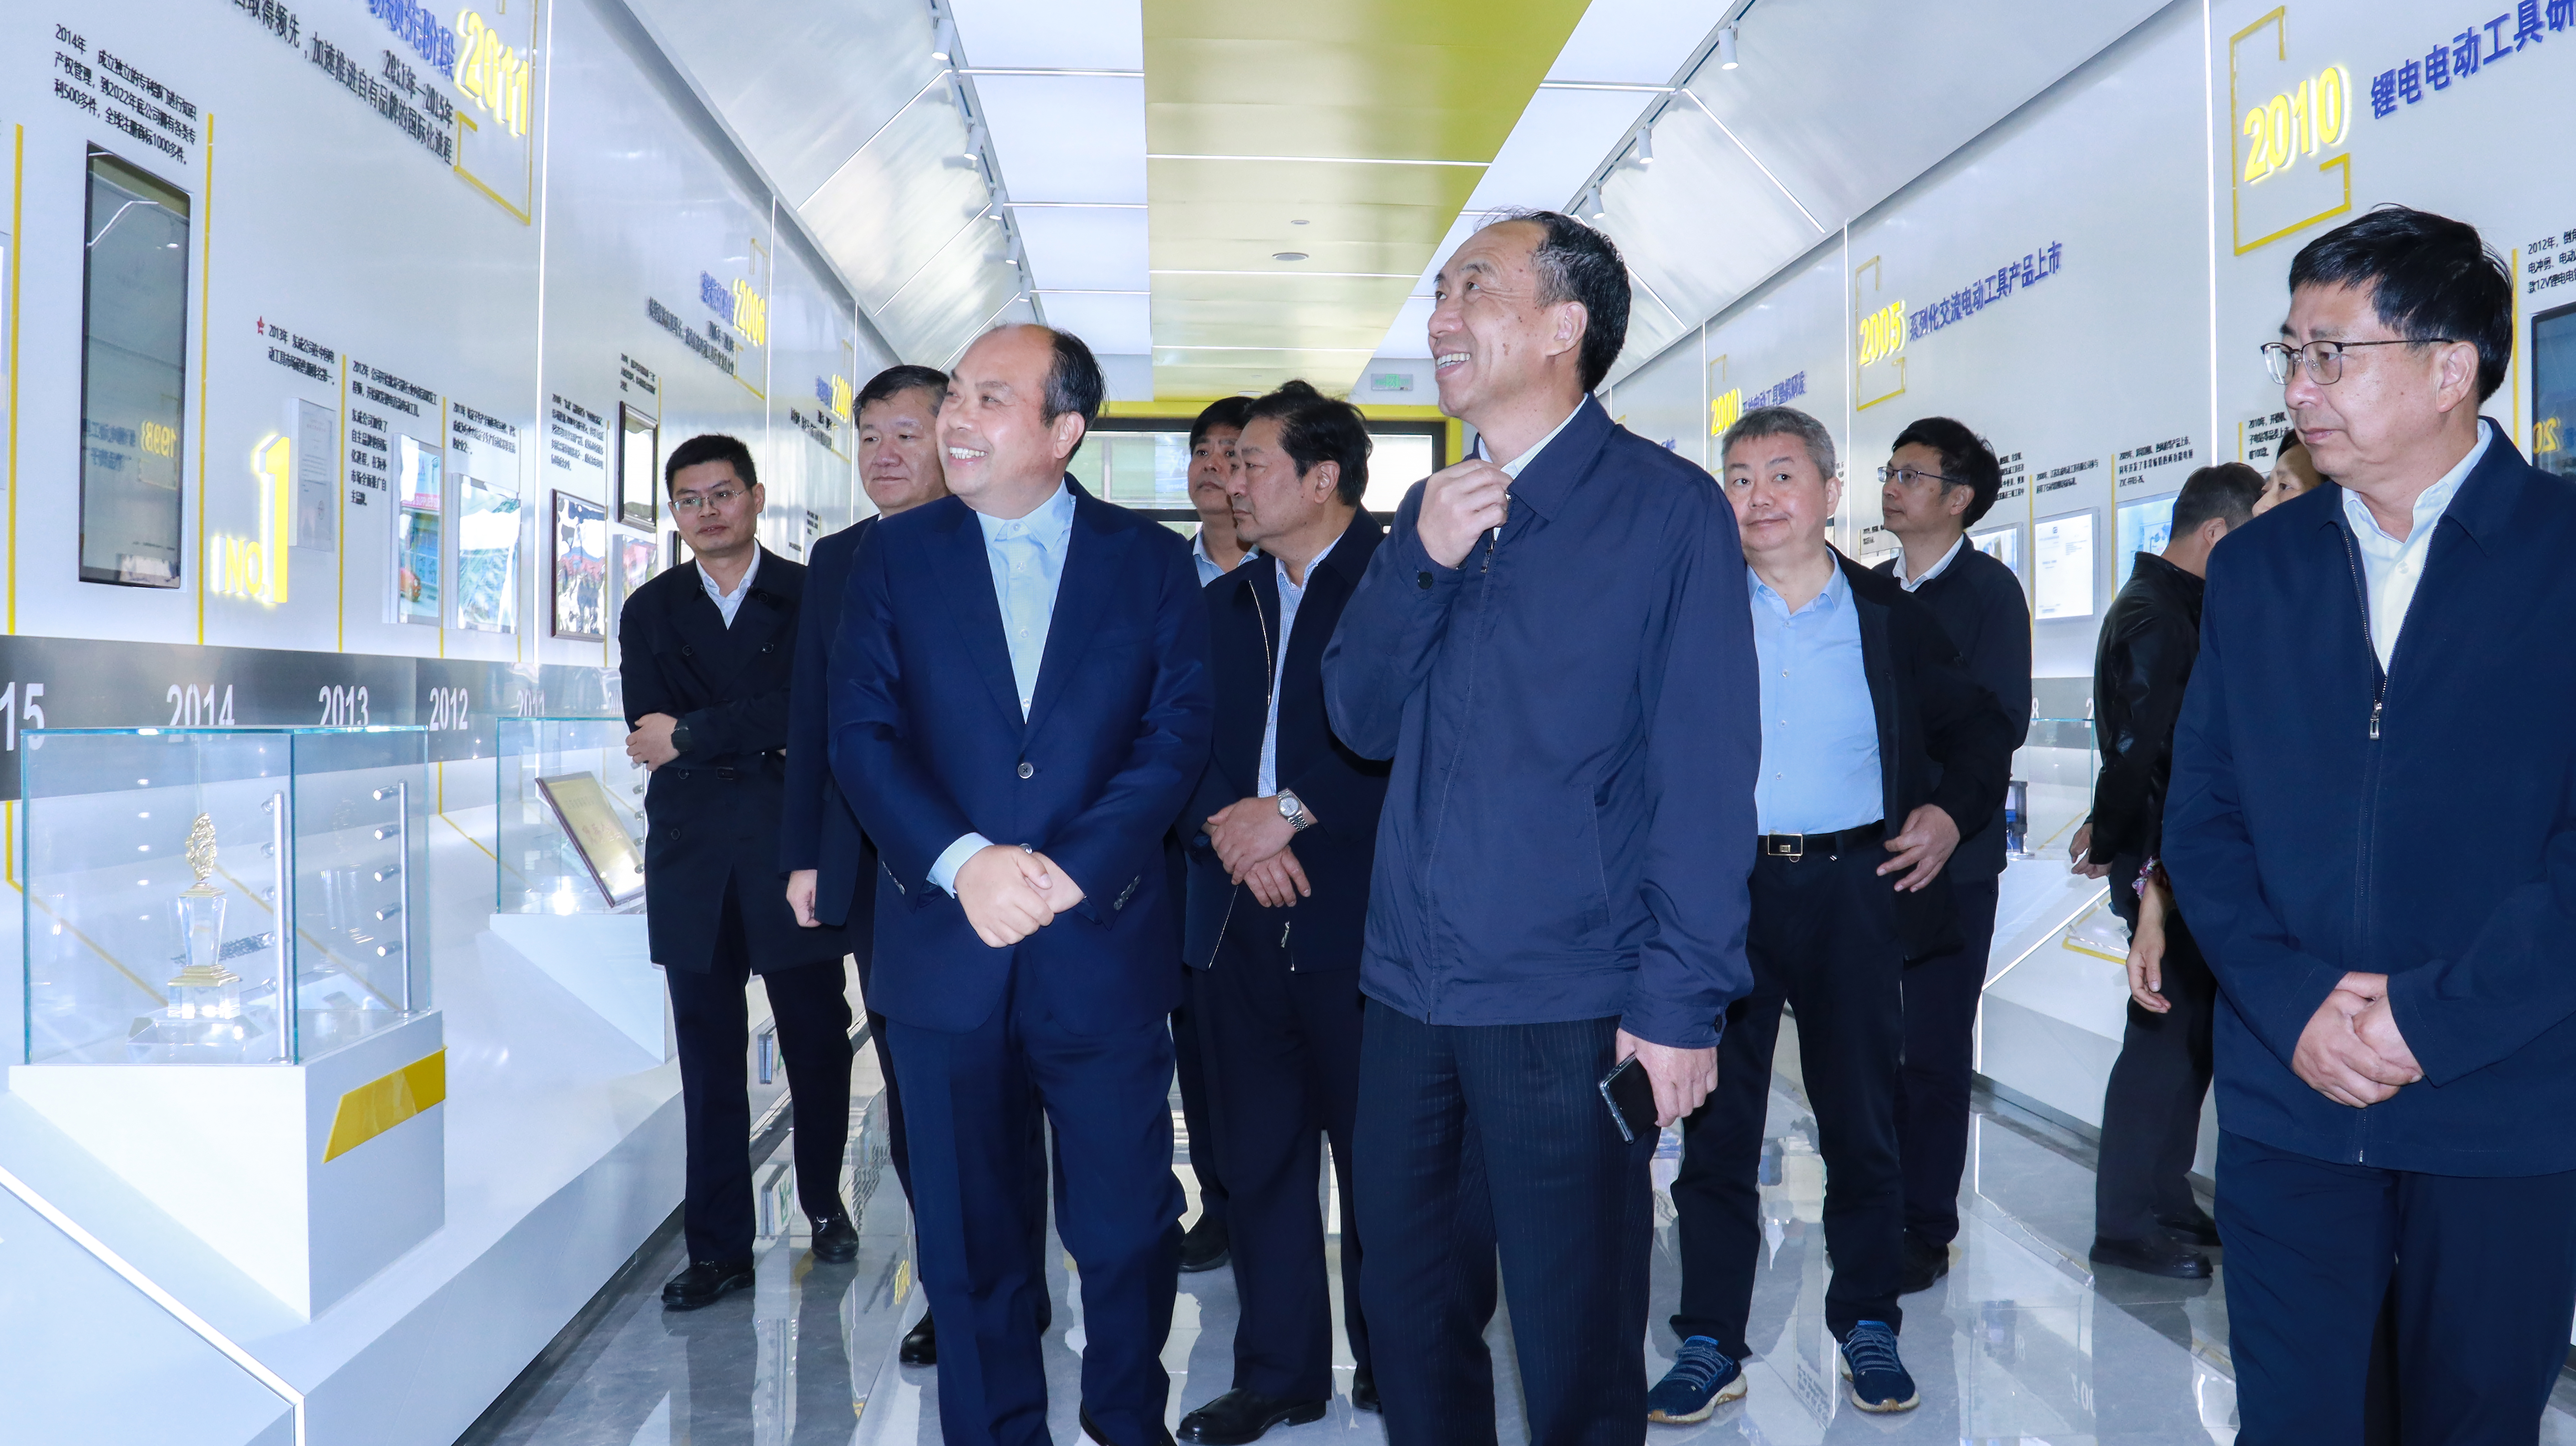 People's Congress Leaders Visited Dongcheng Company for Visitation&Guidance